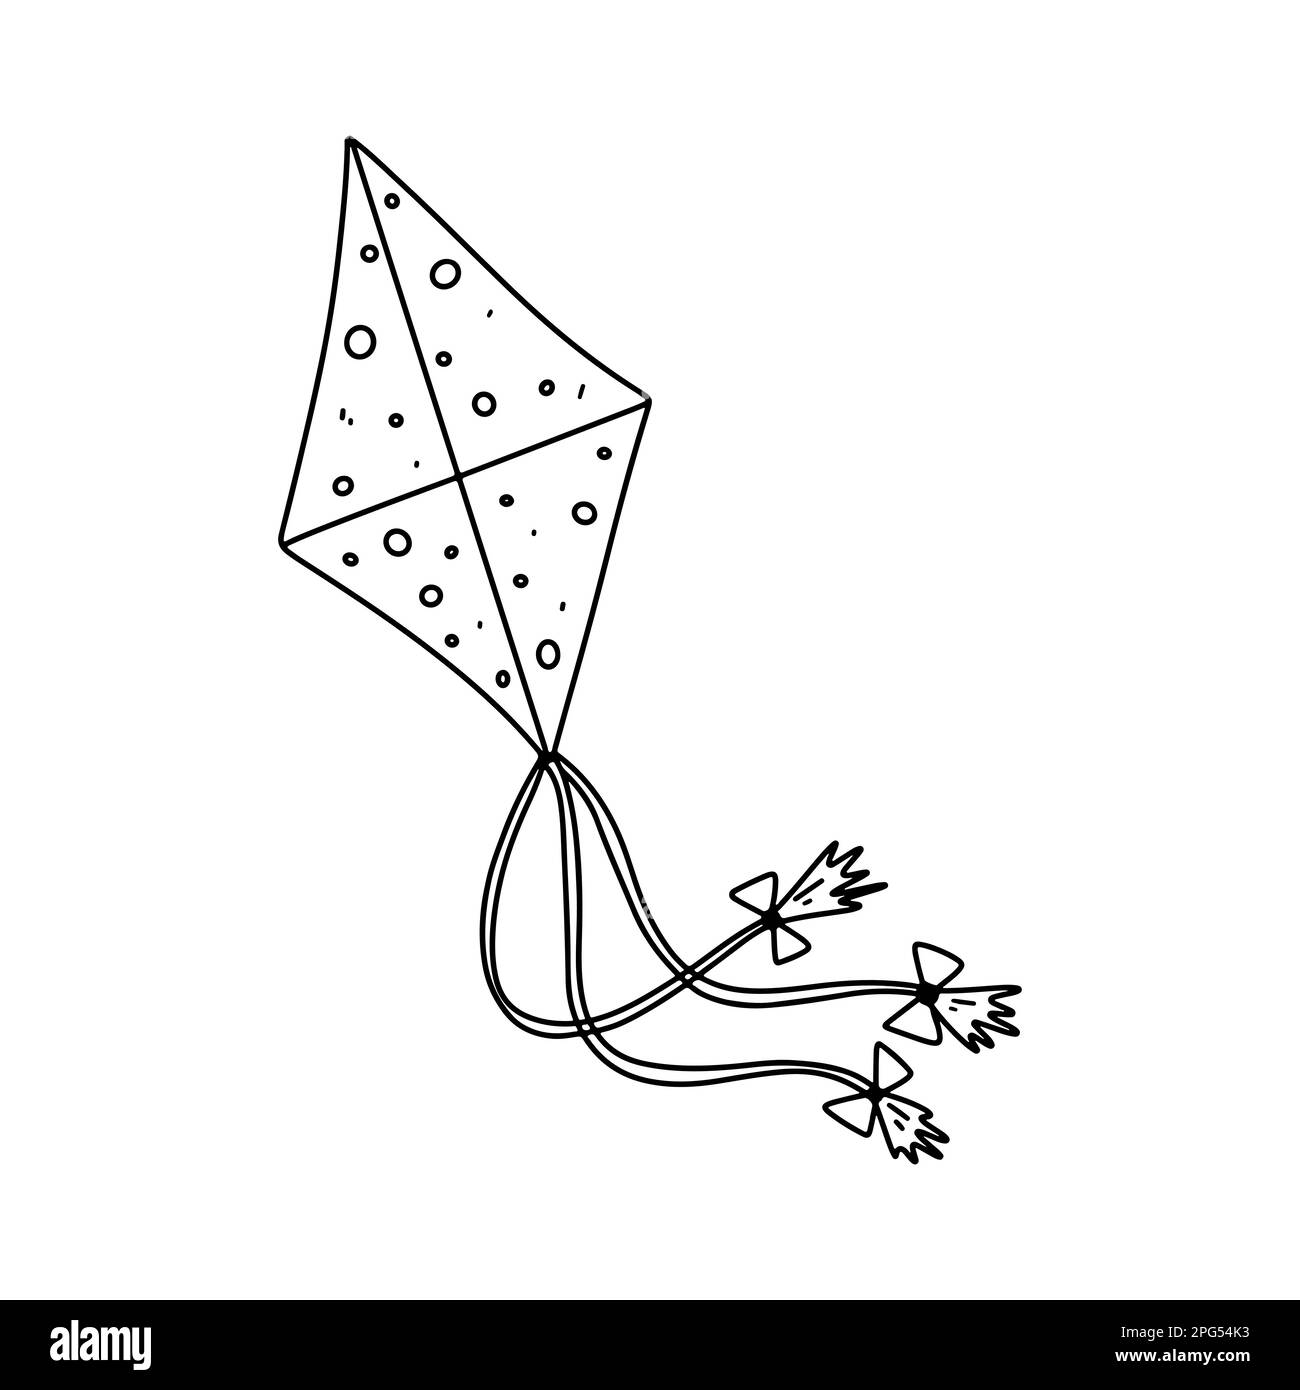 Hand drawn kite in doodle style. Retro linear illustration with black kite doodle on white background Stock Vector